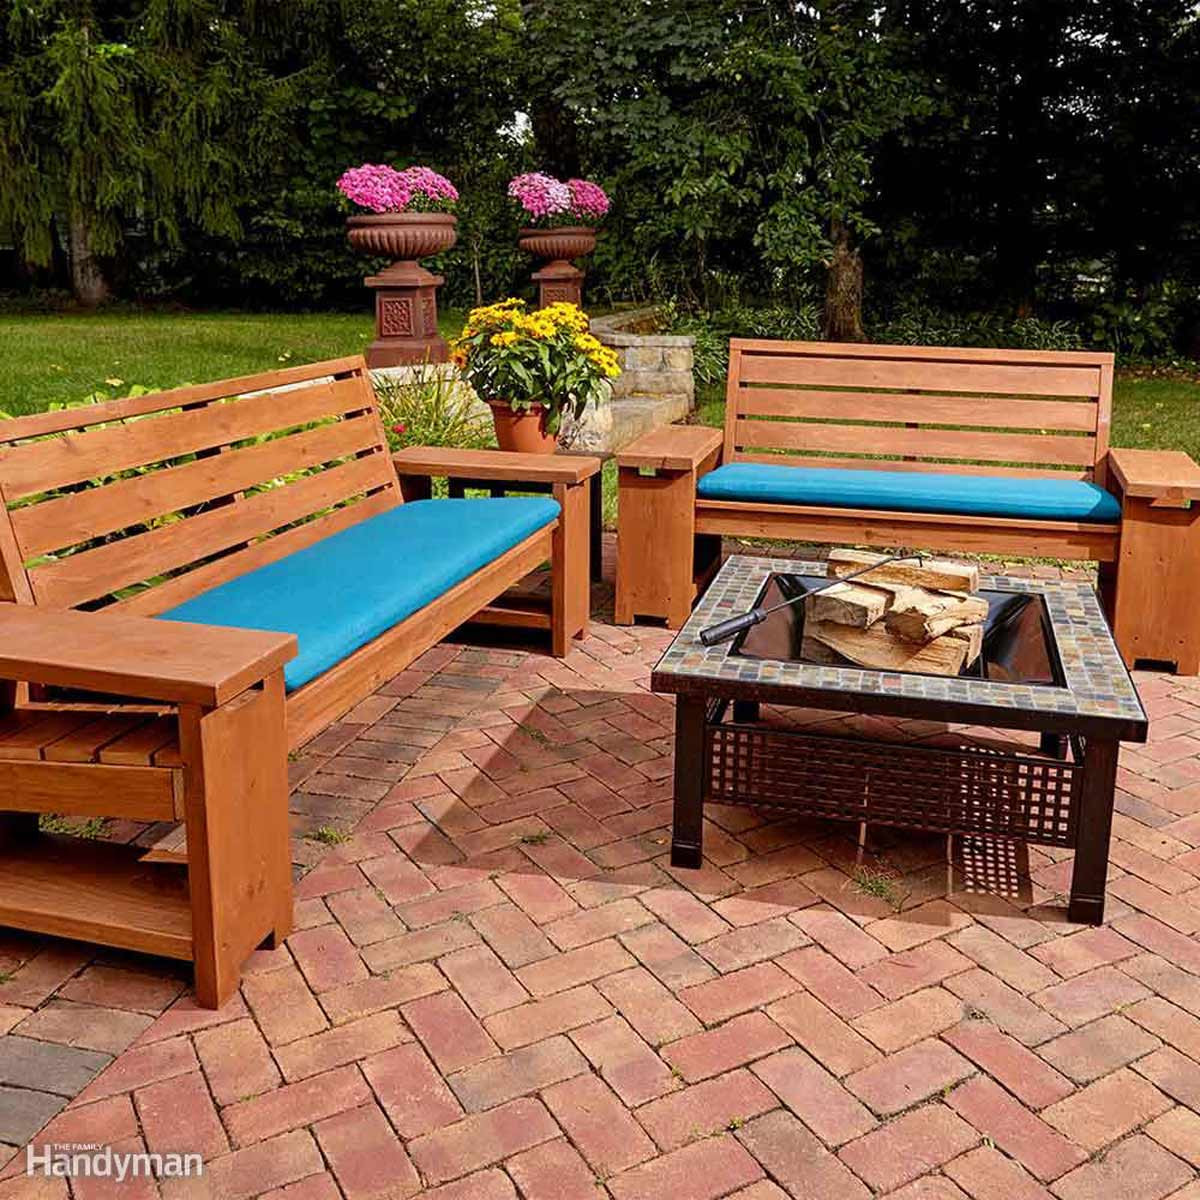 DIY Recliner Plans
 15 Awesome Plans for DIY Patio Furniture